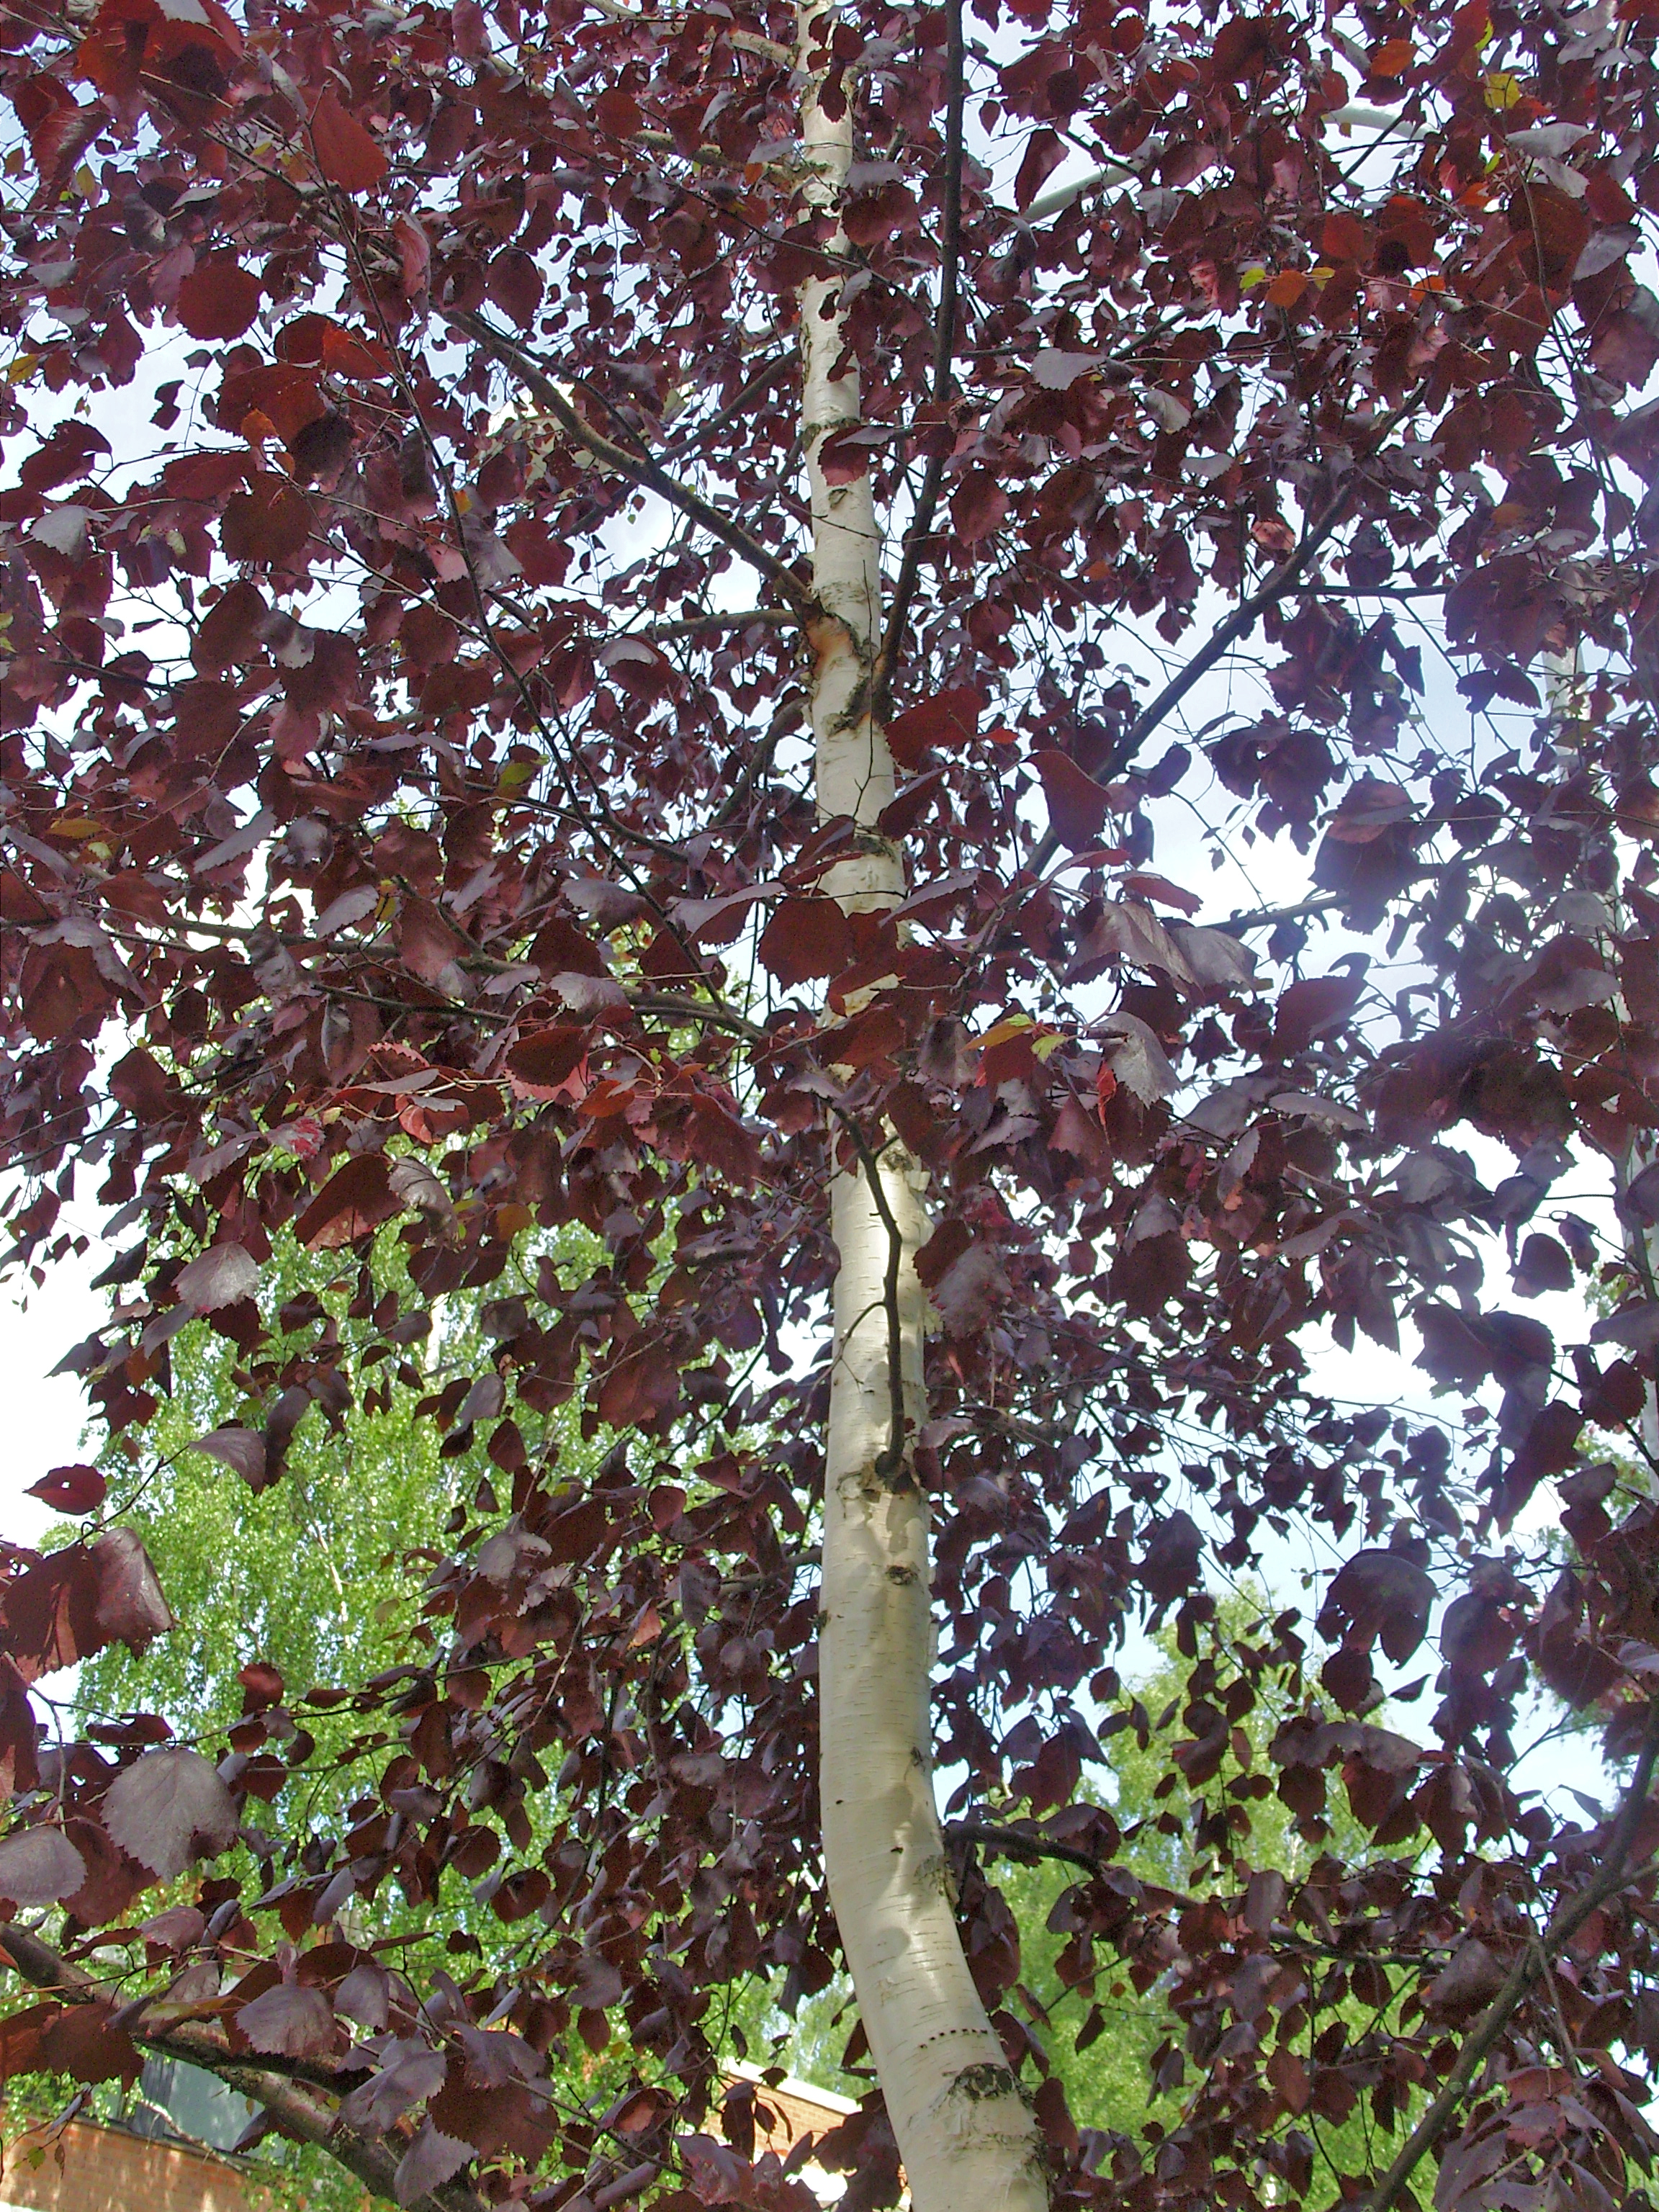 beige bark and purple leaves on a dark brown stem branches.